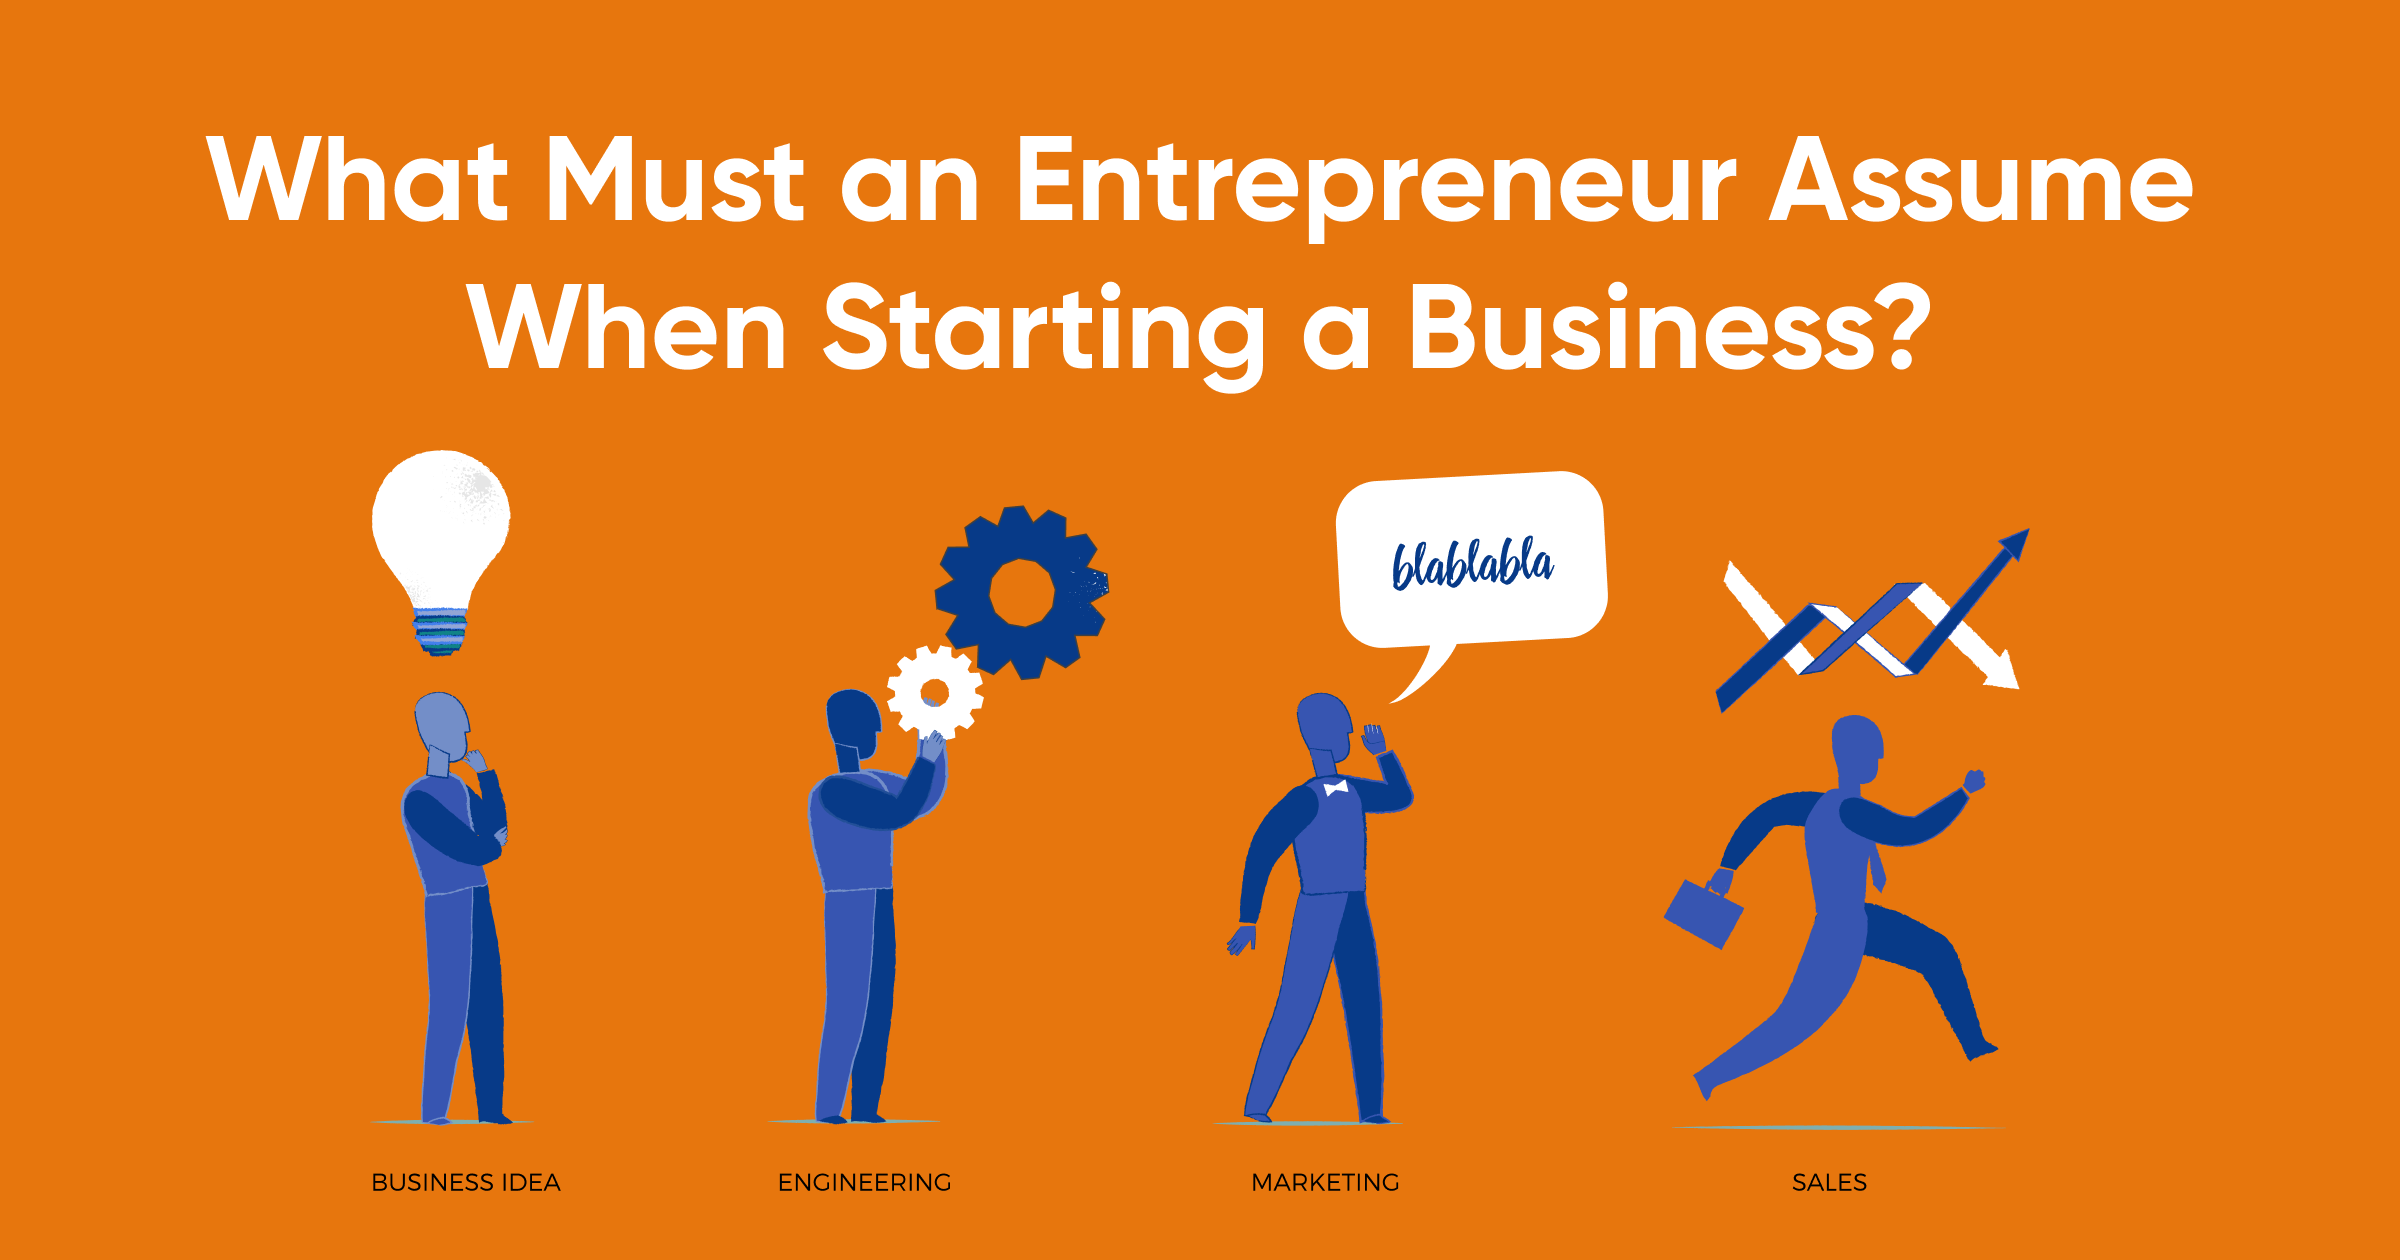 What Must an Entrepreneur Assume When Starting a Business? (Let's Explore the Top 10!)